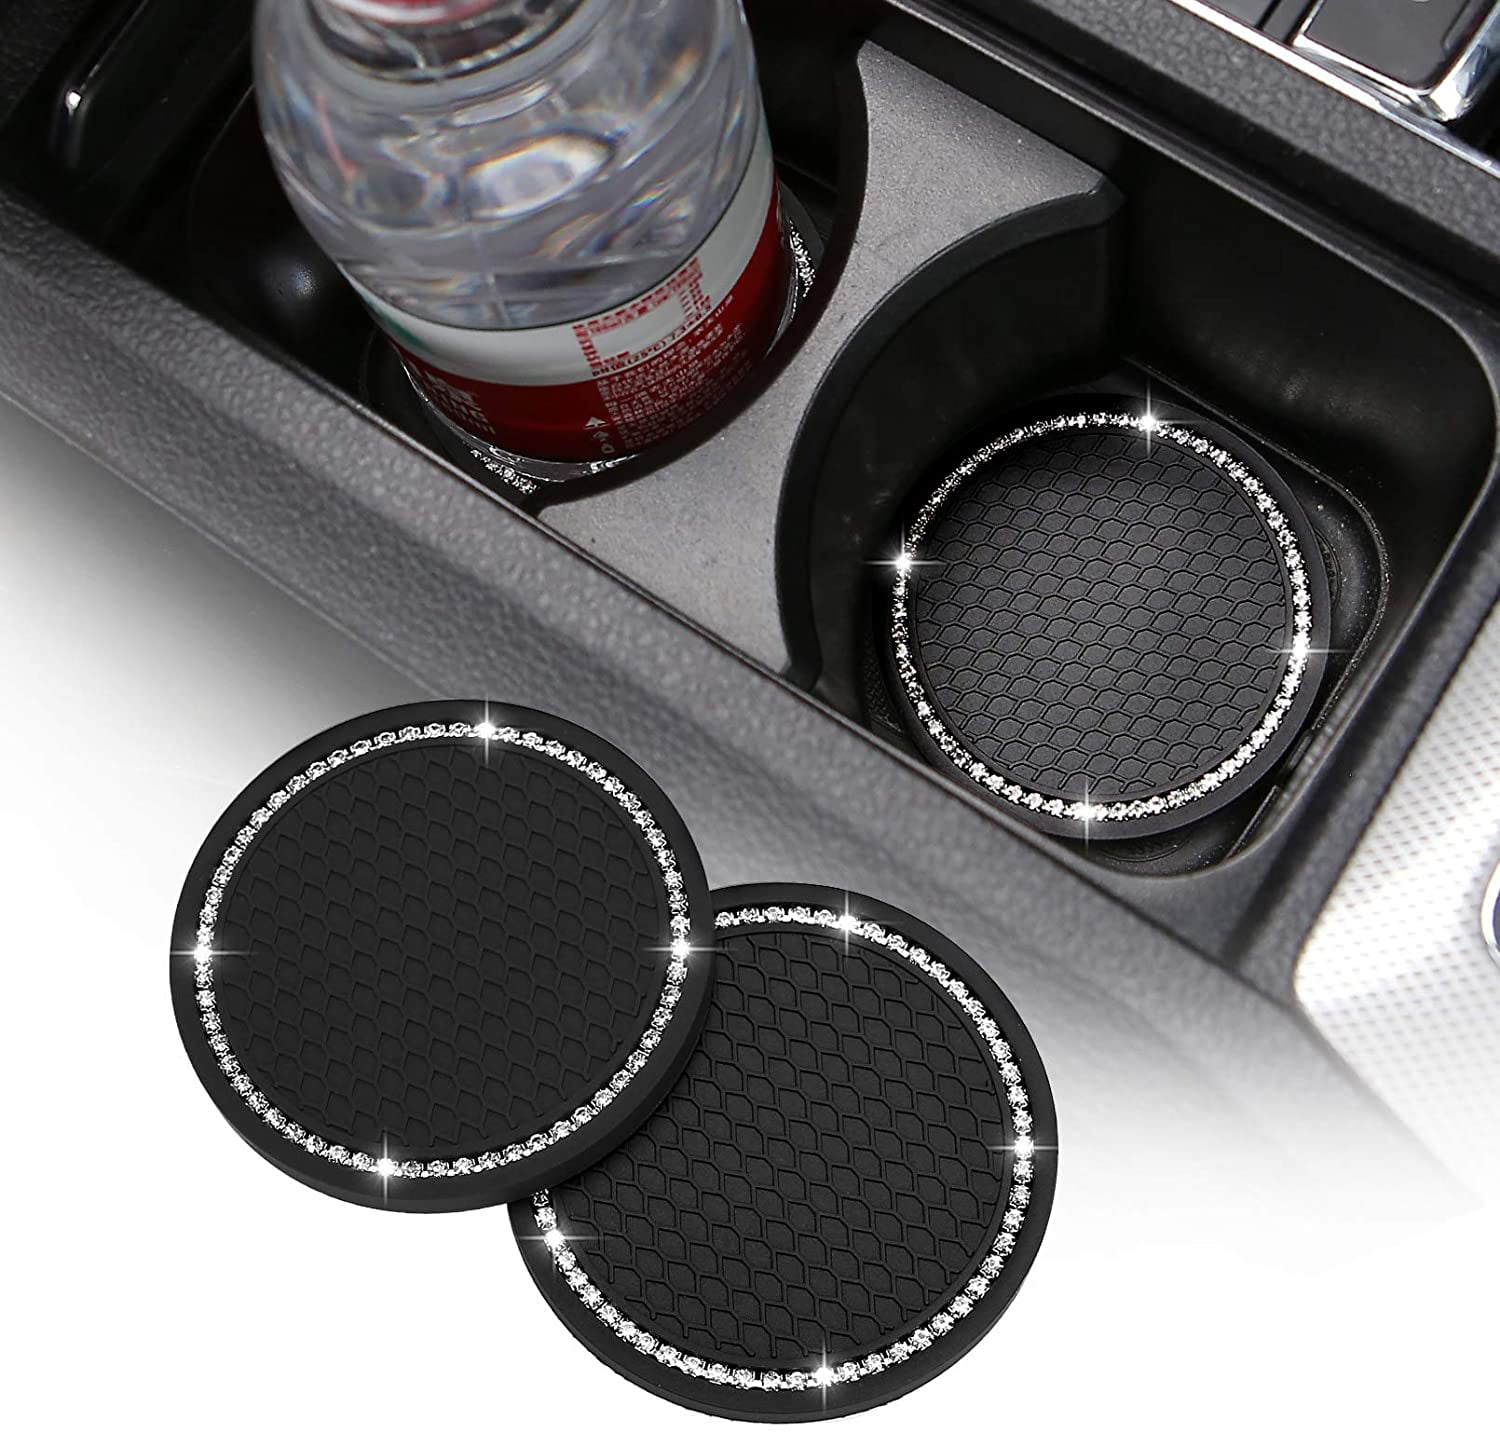 4-Pack Universal 3 inch Silicone Soft Insert Vehicle Coasters for Car Decor Car Coaster Automotive Cup Holders 